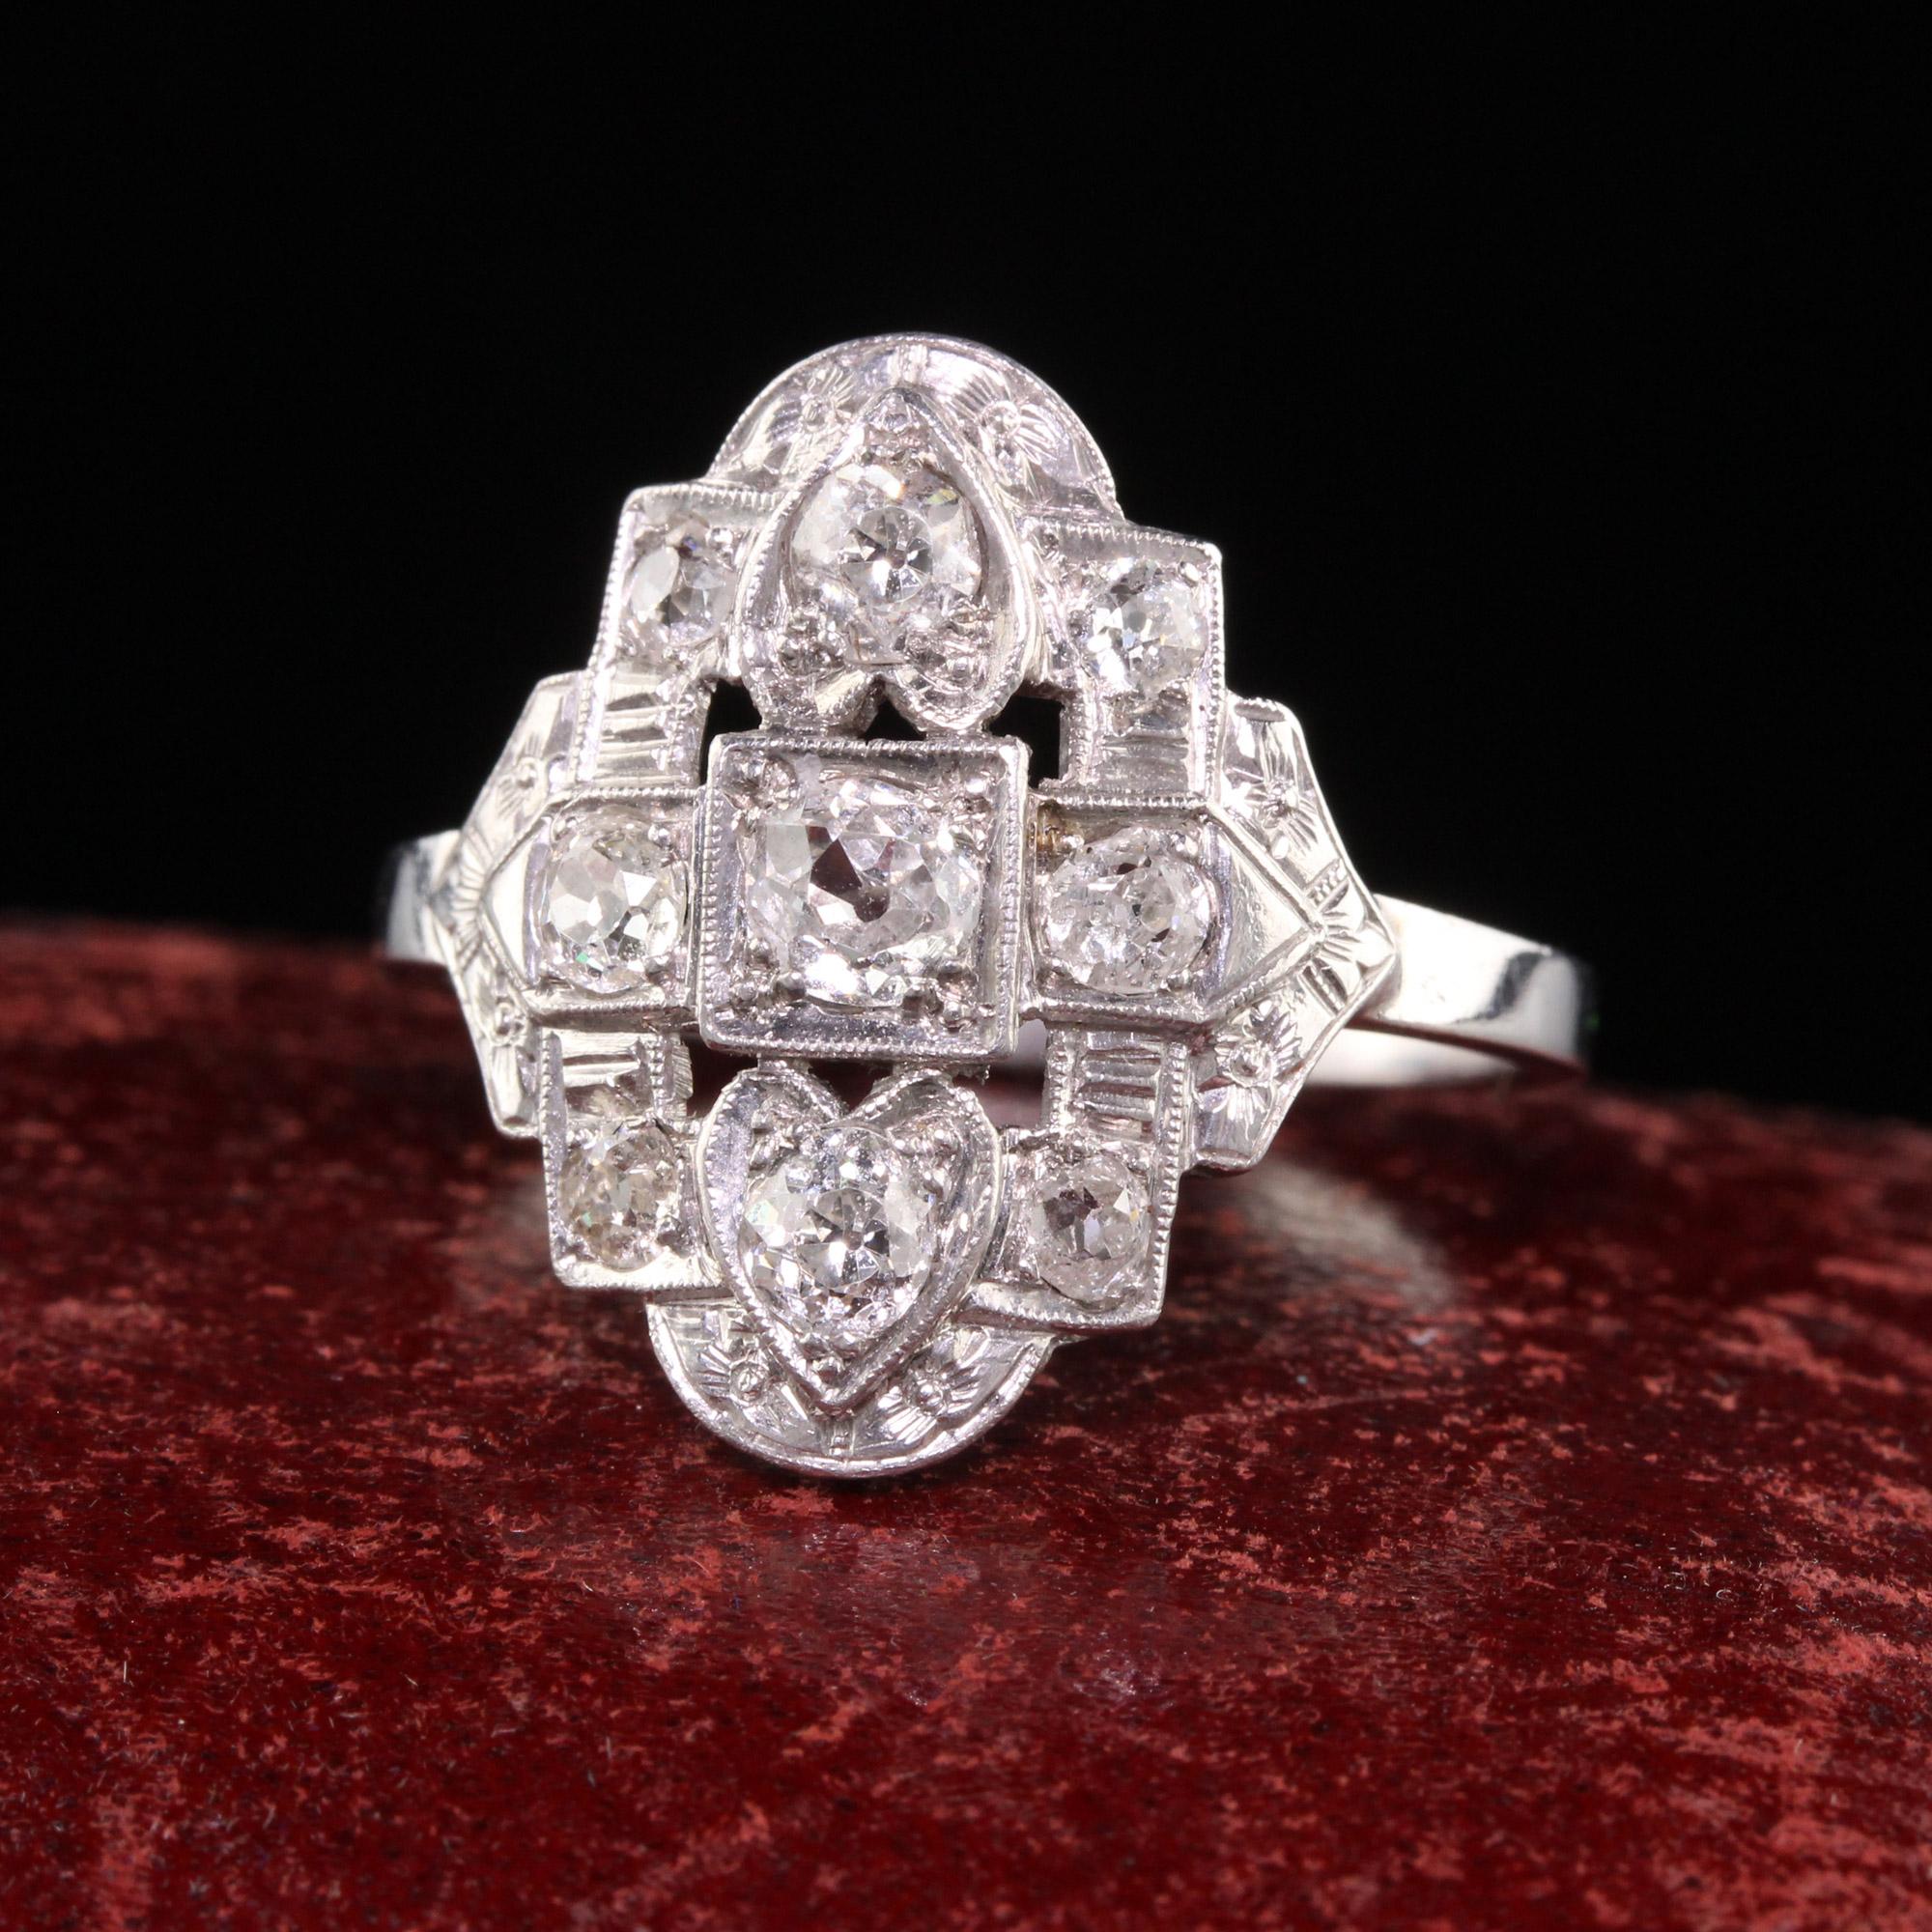 Beautiful Antique Art Deco Platinum Old Mine Diamond Heart Design Shield Ring. This gorgeous ring is crafted in platinum. The ring has old mine cut diamond set throughout the ring and has a beautiful heart shape pattern on top where the diamonds are